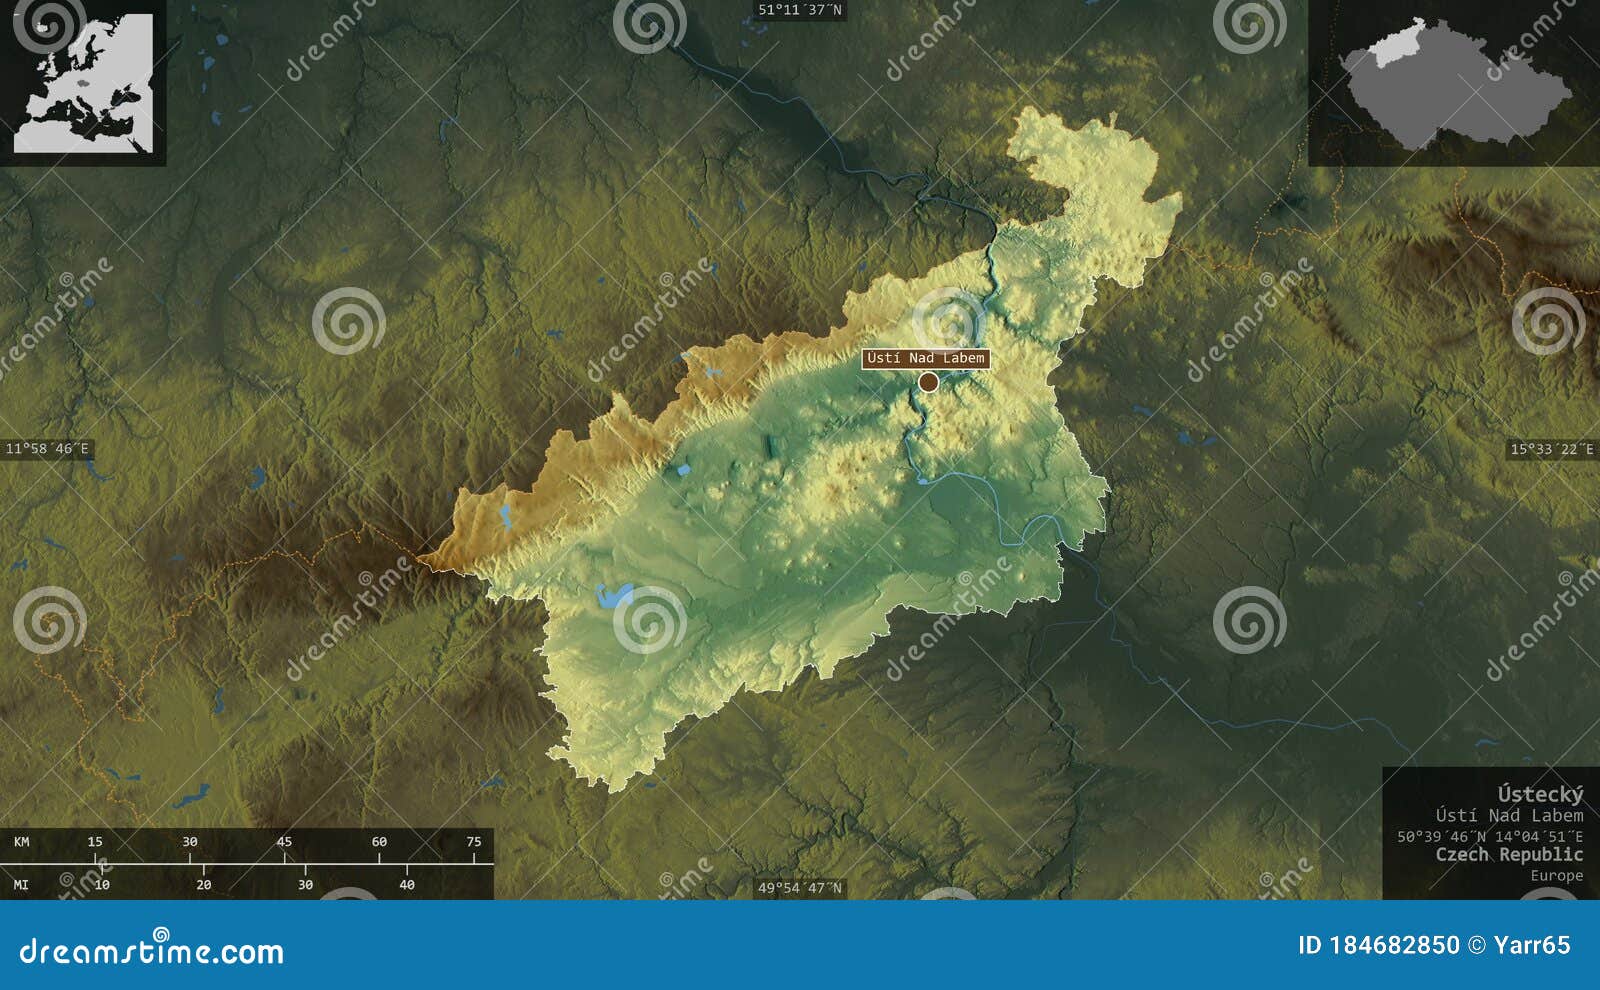 Ustecky Czech Republic Composition Relief Stock Illustration Illustration Of Geography Legend